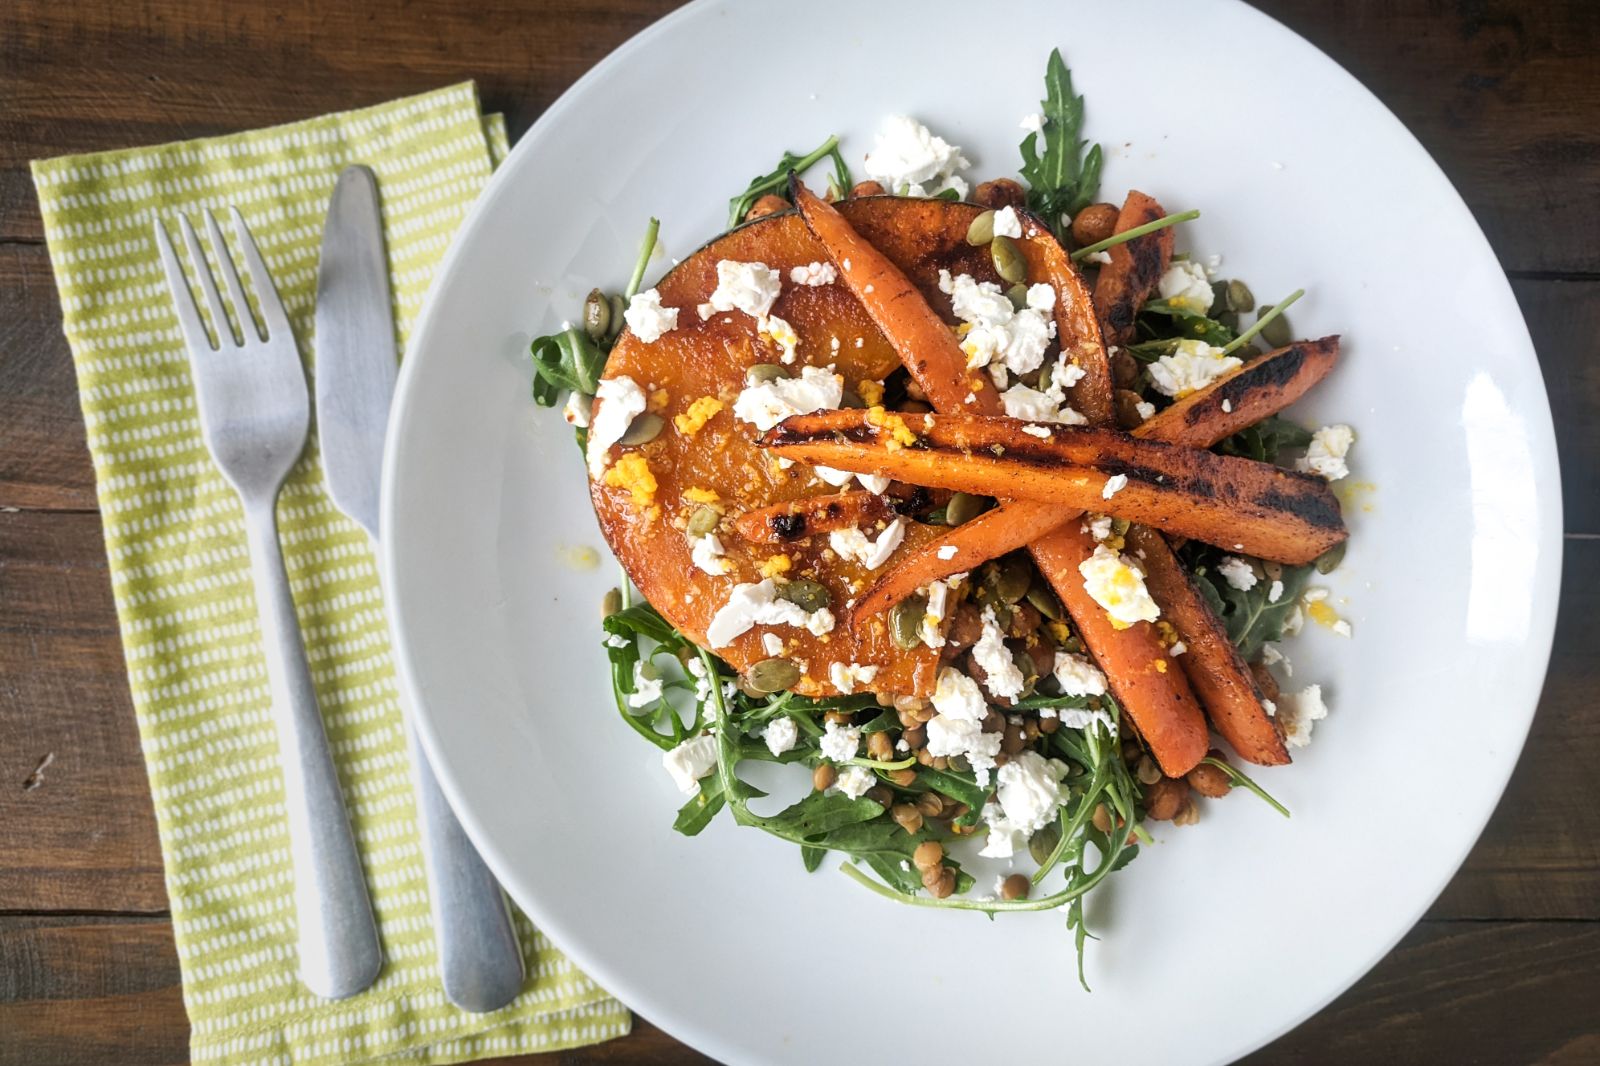 Roast pumpkin and carrot salad with lentils and zesty citrus dressing